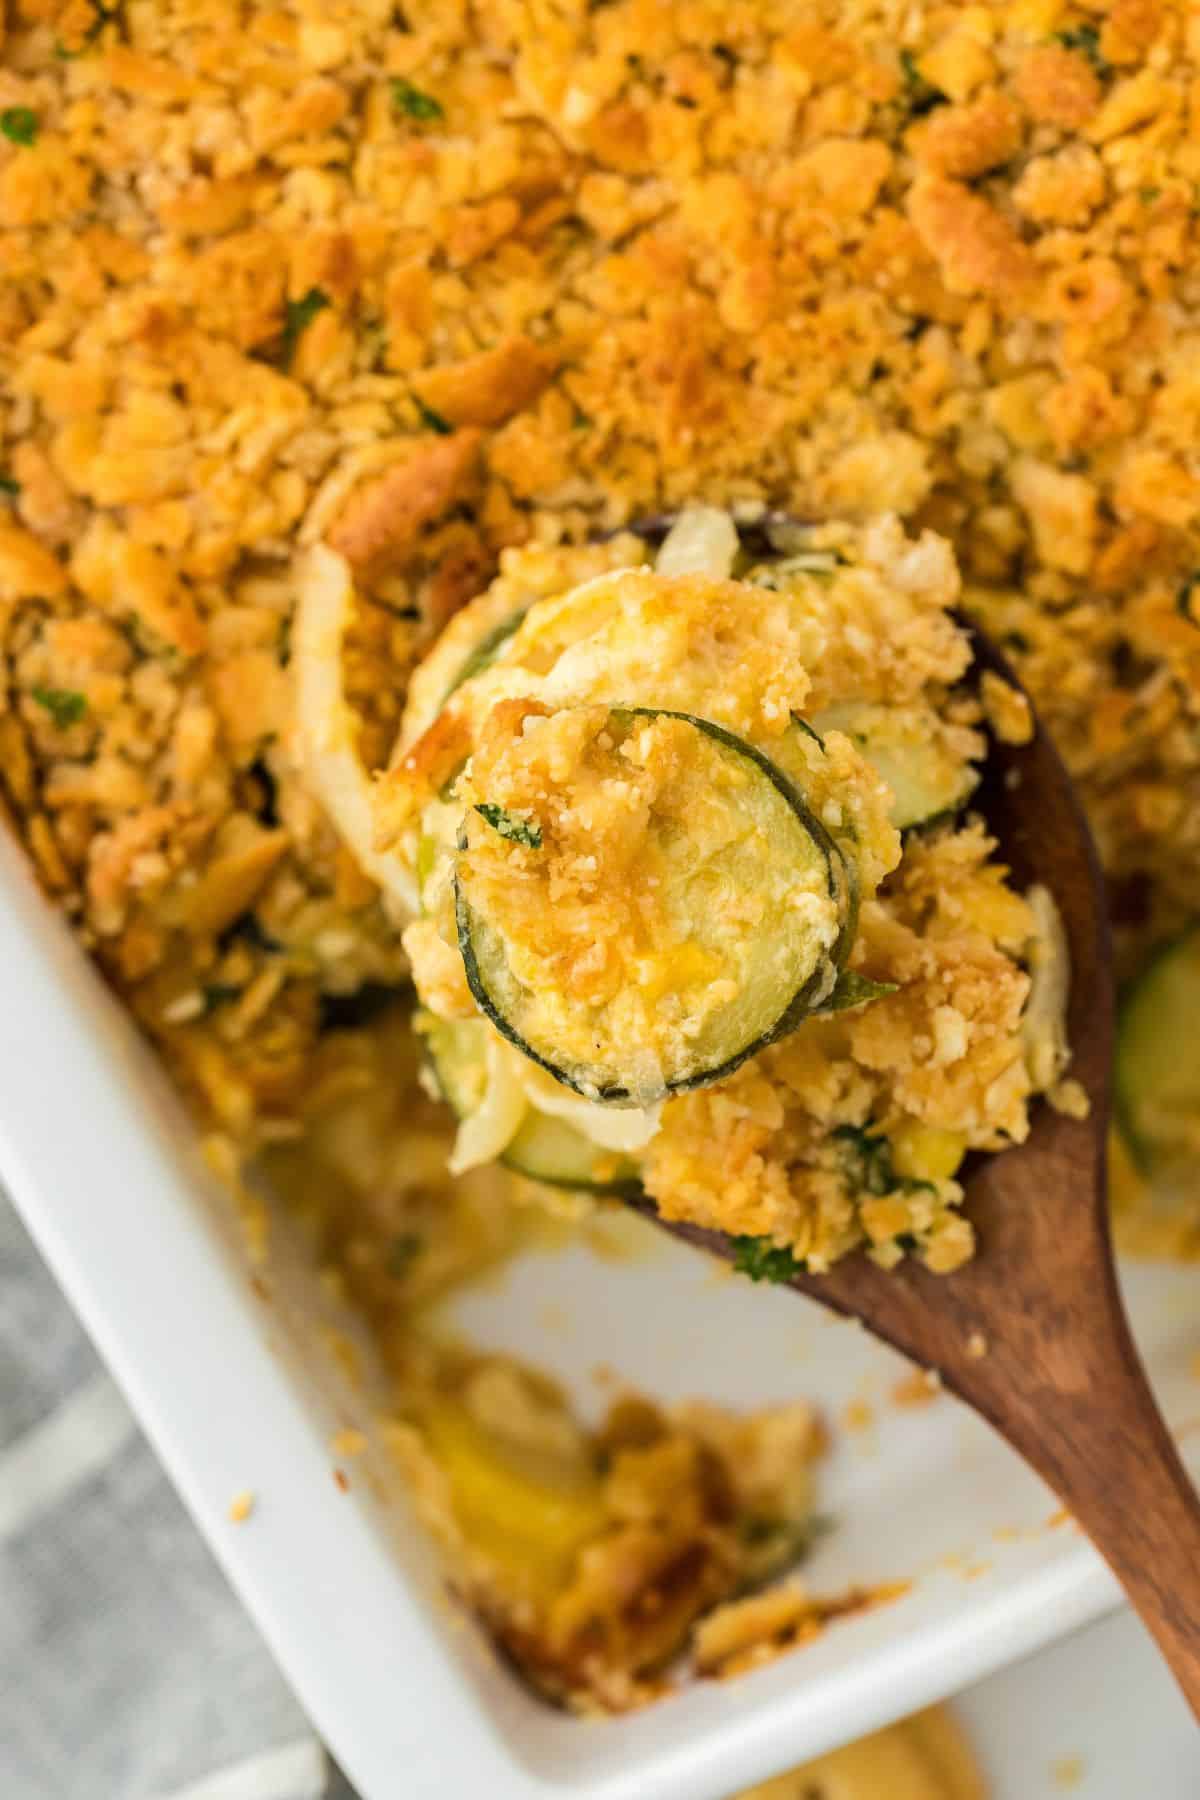 Close up of a baked squash casserole in a white dish, topped with a crispy, golden-brown crust. A wooden spoon is scooping a portion, revealing the creamy interior filled with slices of yellow squash and zucchini